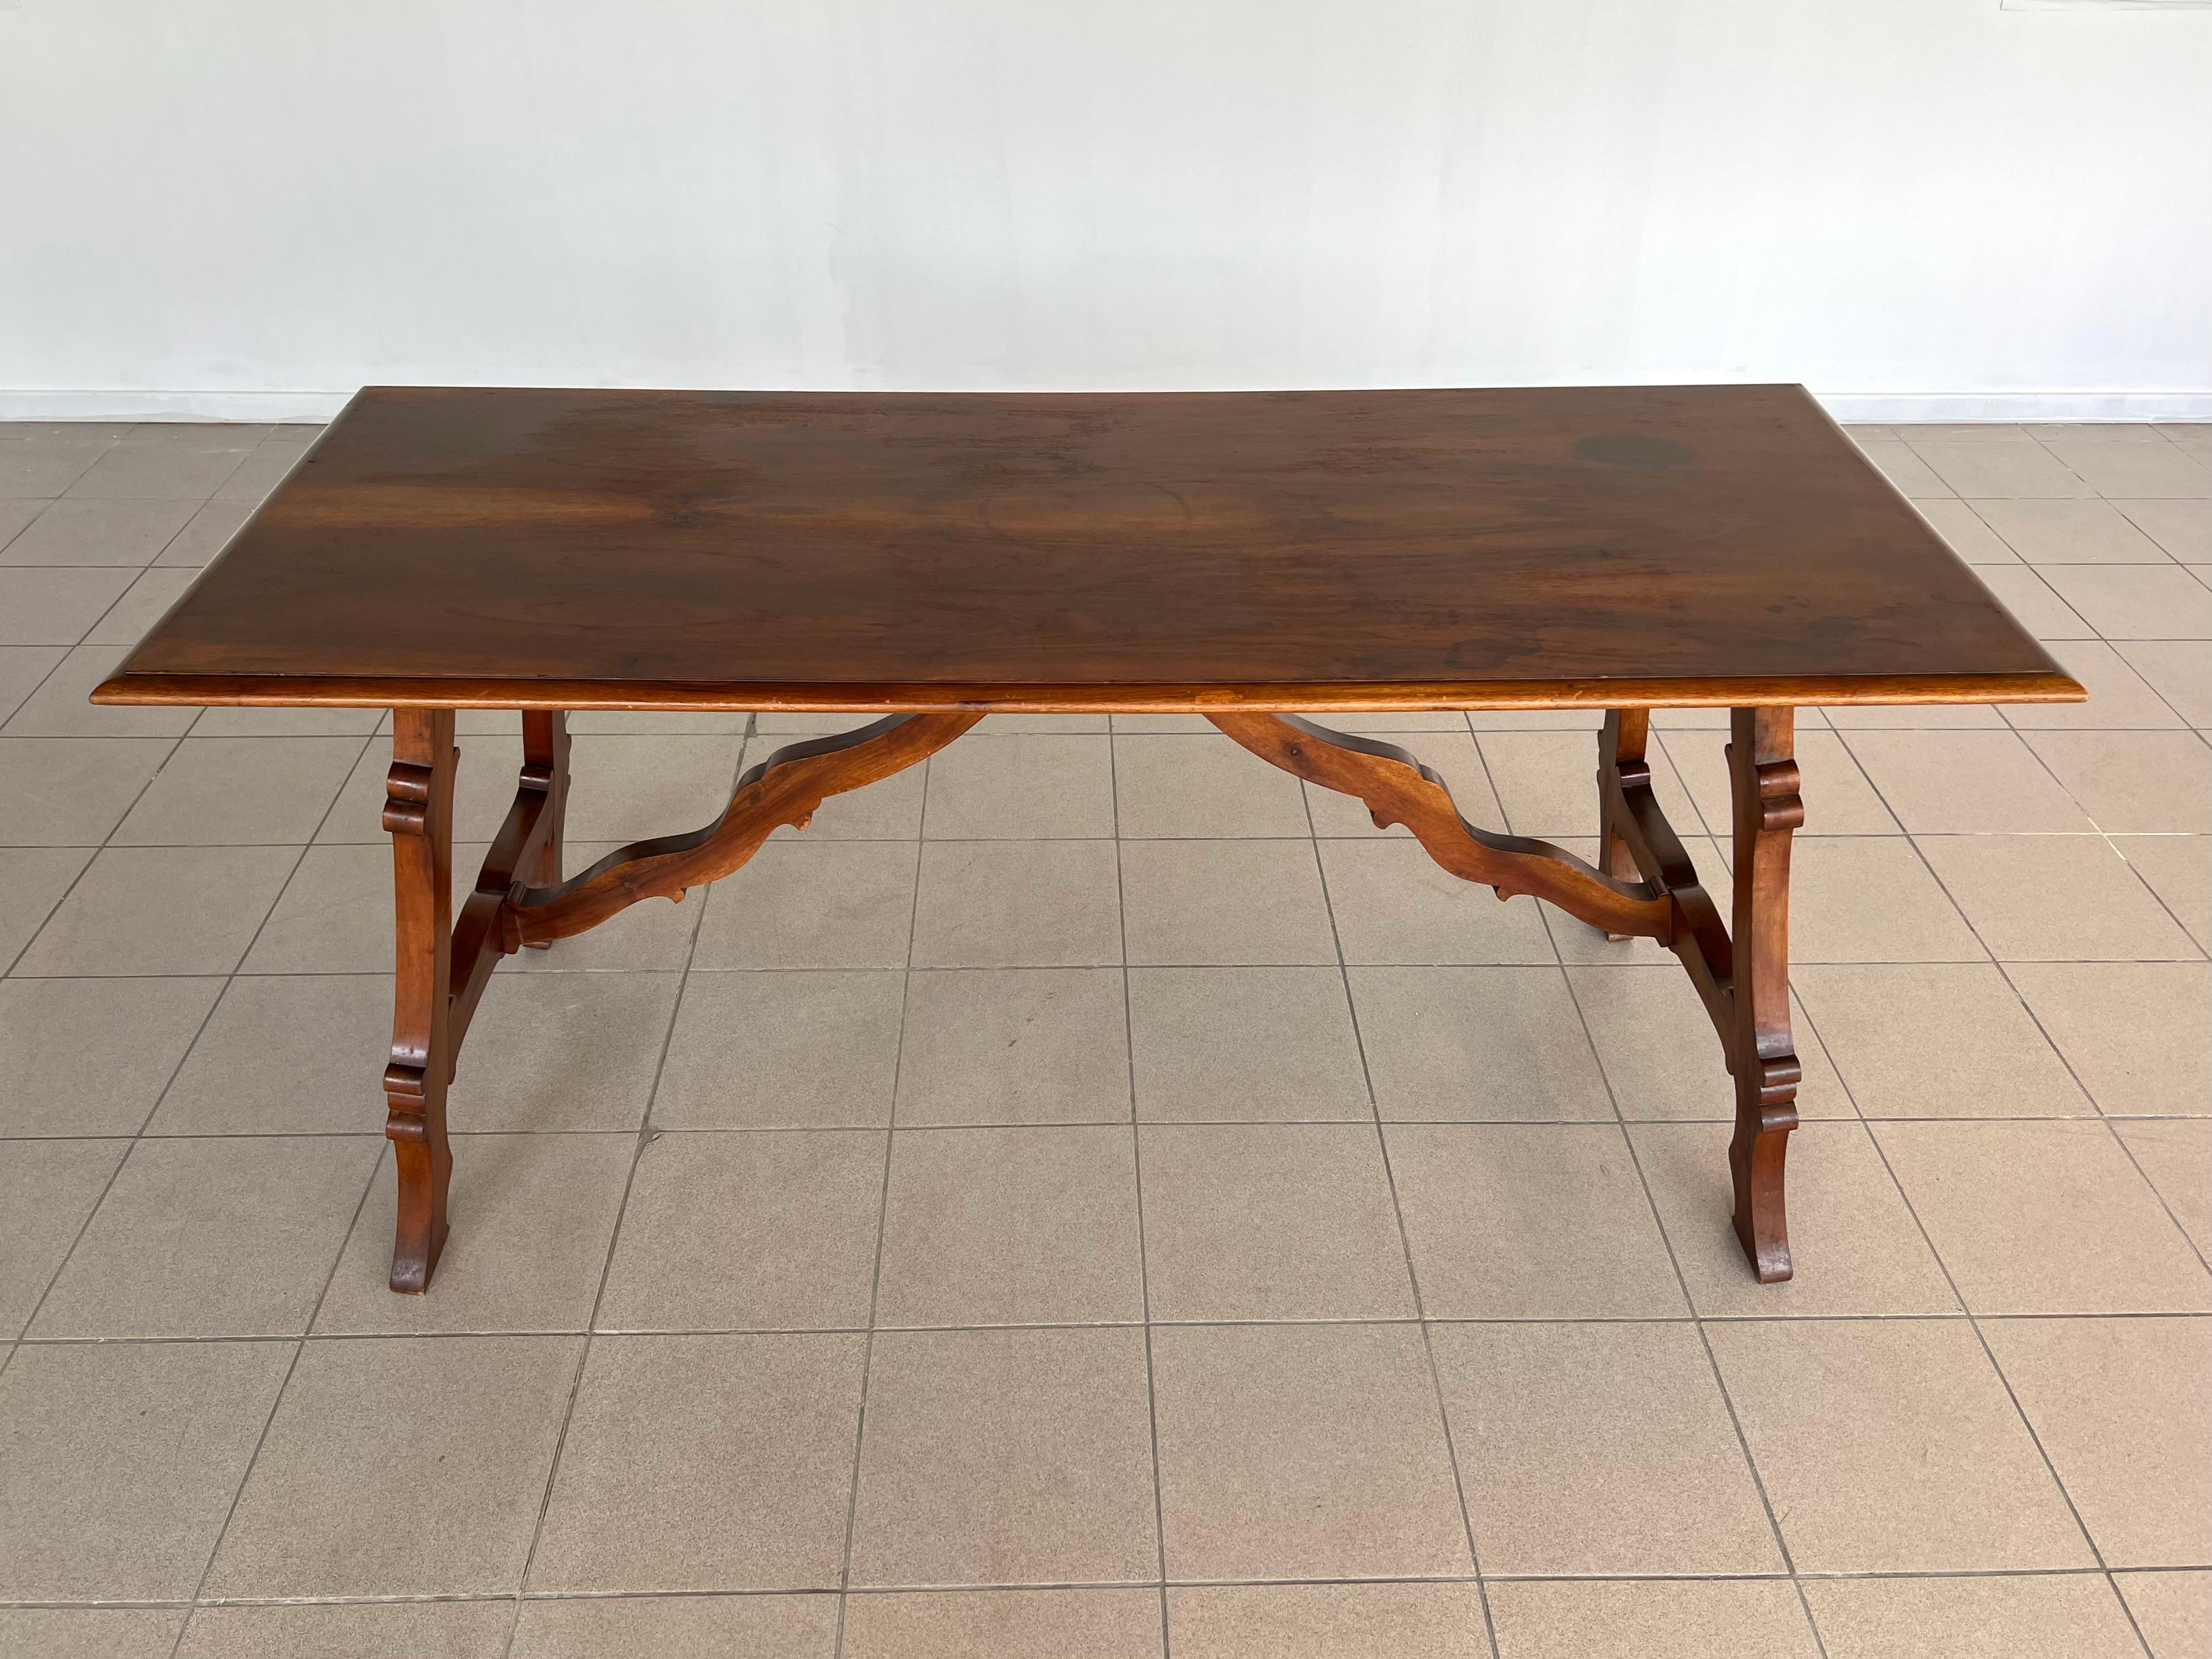 Italian Tuscan Renaissance Refectory Hand Crafted Walnut Dining Table In Good Condition For Sale In Bridgeport, CT